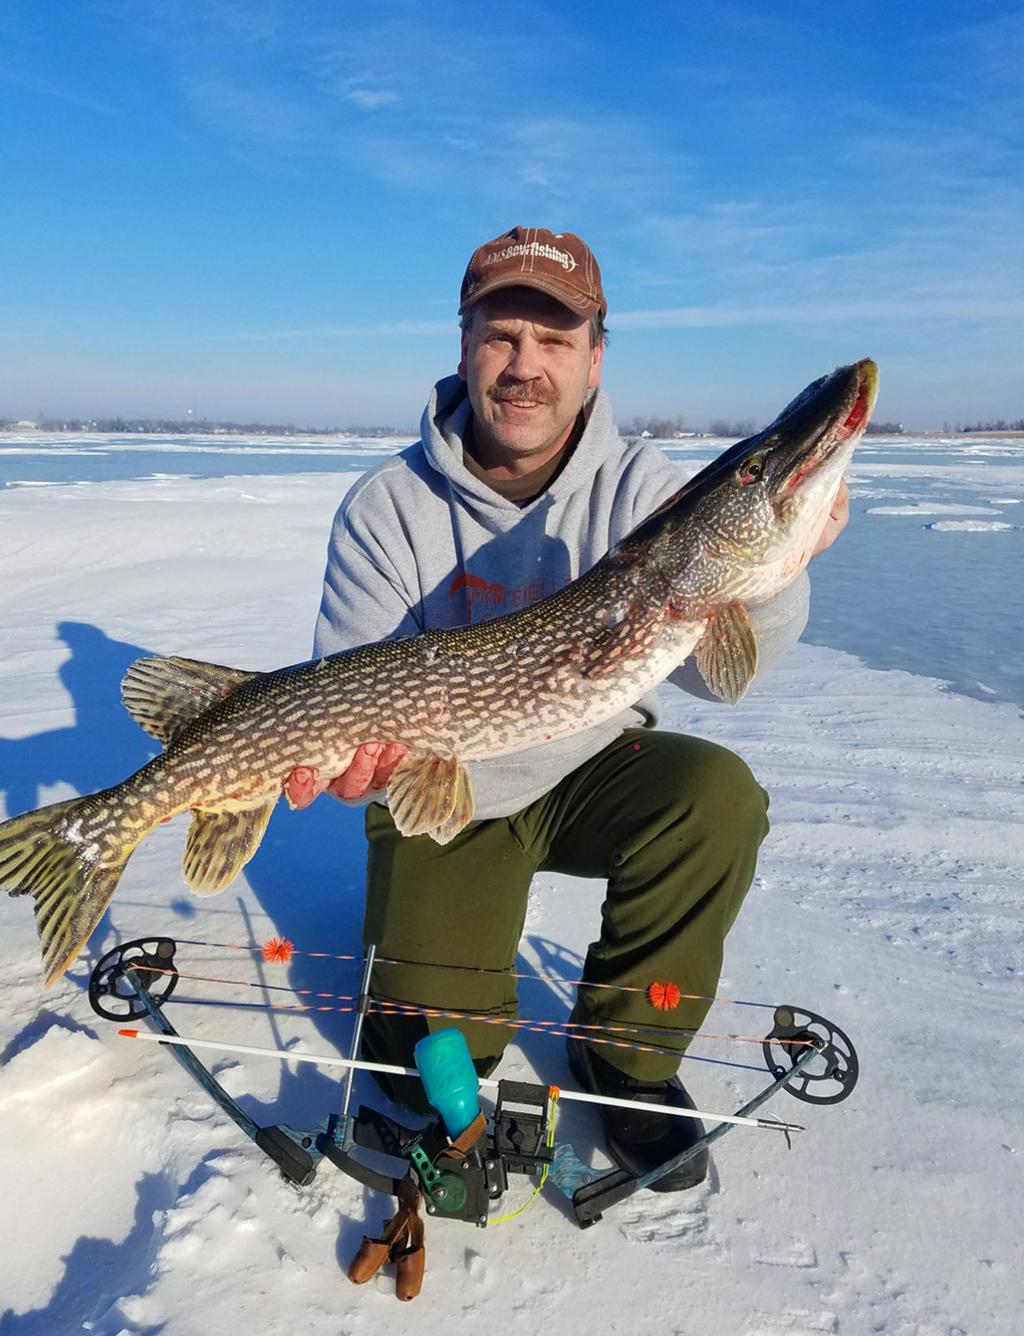 Northern pike spear fishing in South Dakota with a twist, Sports